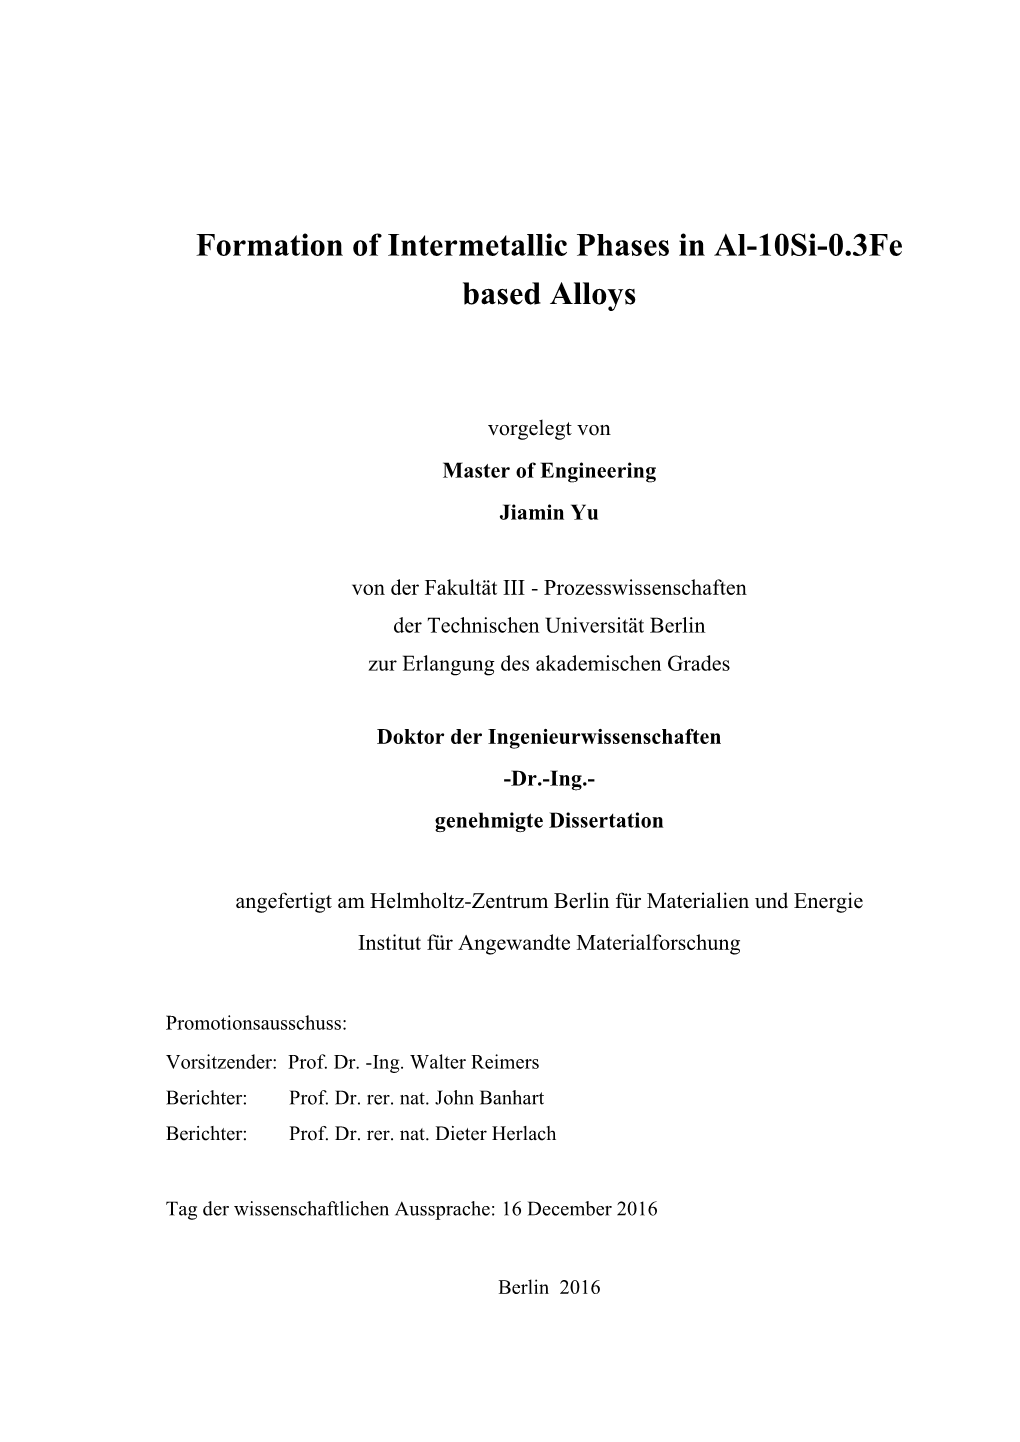 Formation of Intermetallic Phases in Al-10Si-0.3Fe Based Alloys